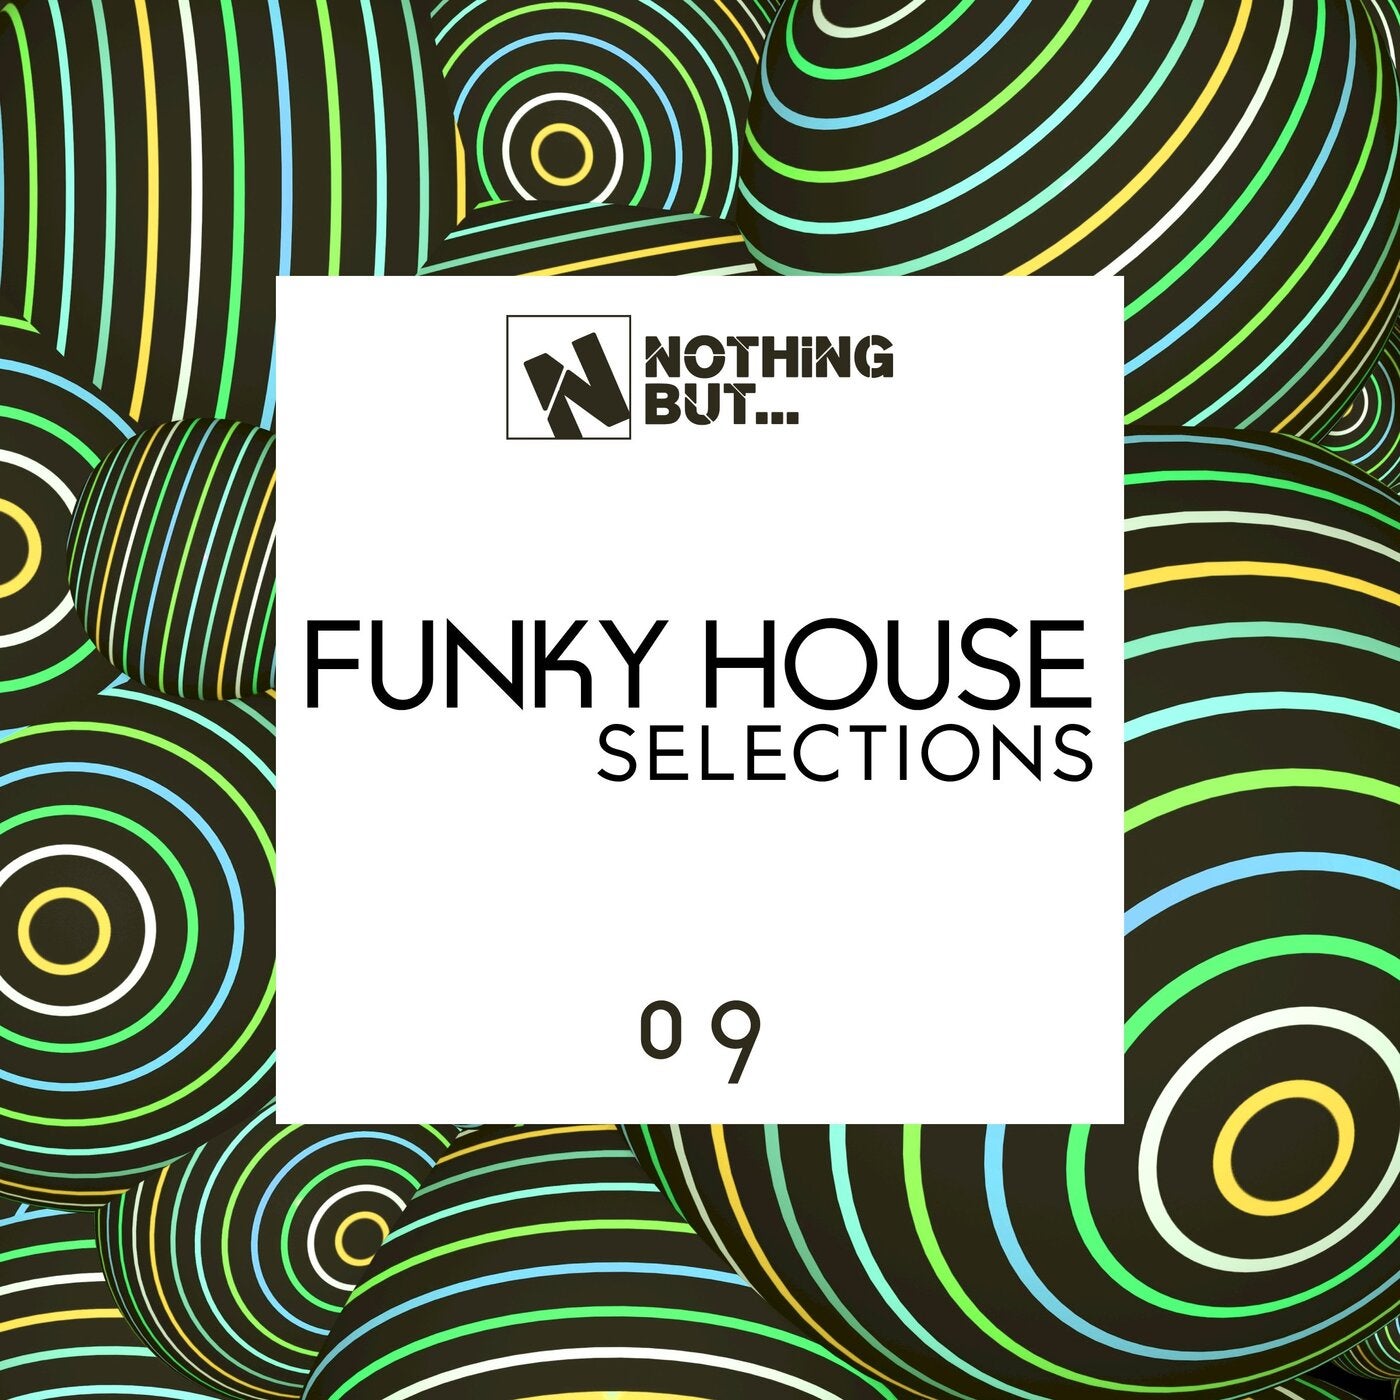 Nothing But... Funky House Selections, Vol. 09